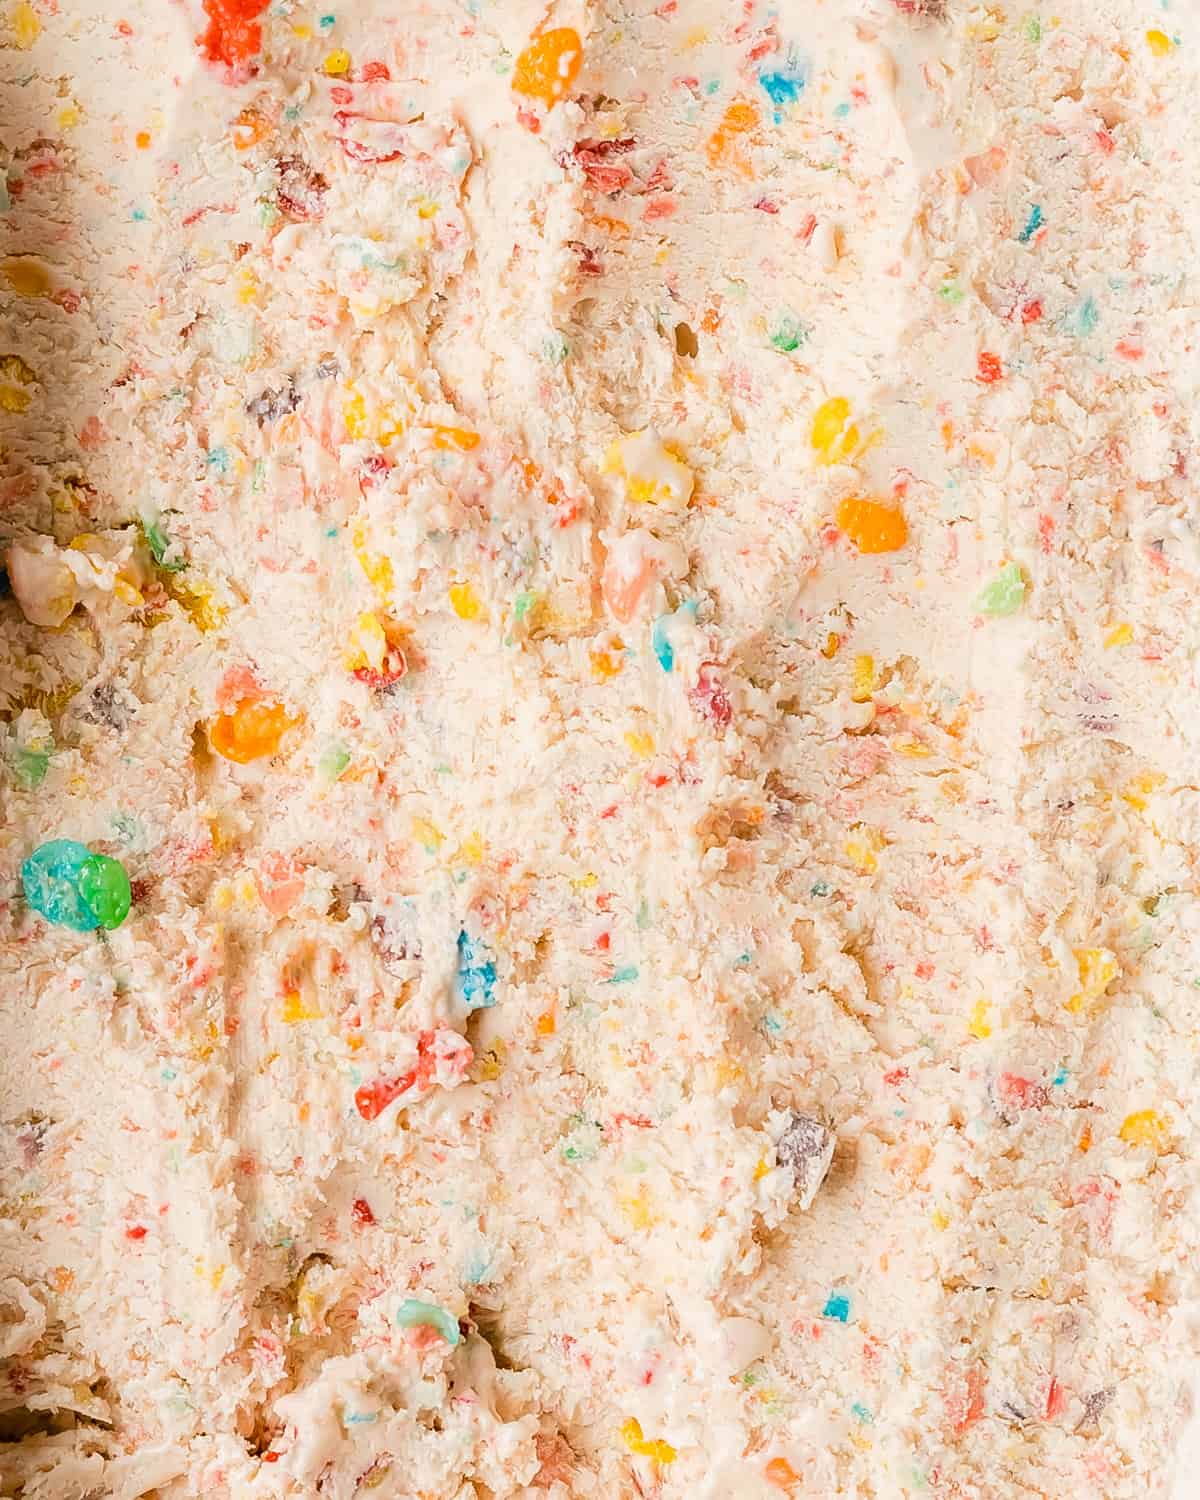 Fruity Pebbles ice cream is an easy and creamy, no churn cereal milk ice cream infused with fruity pebbles flavor.